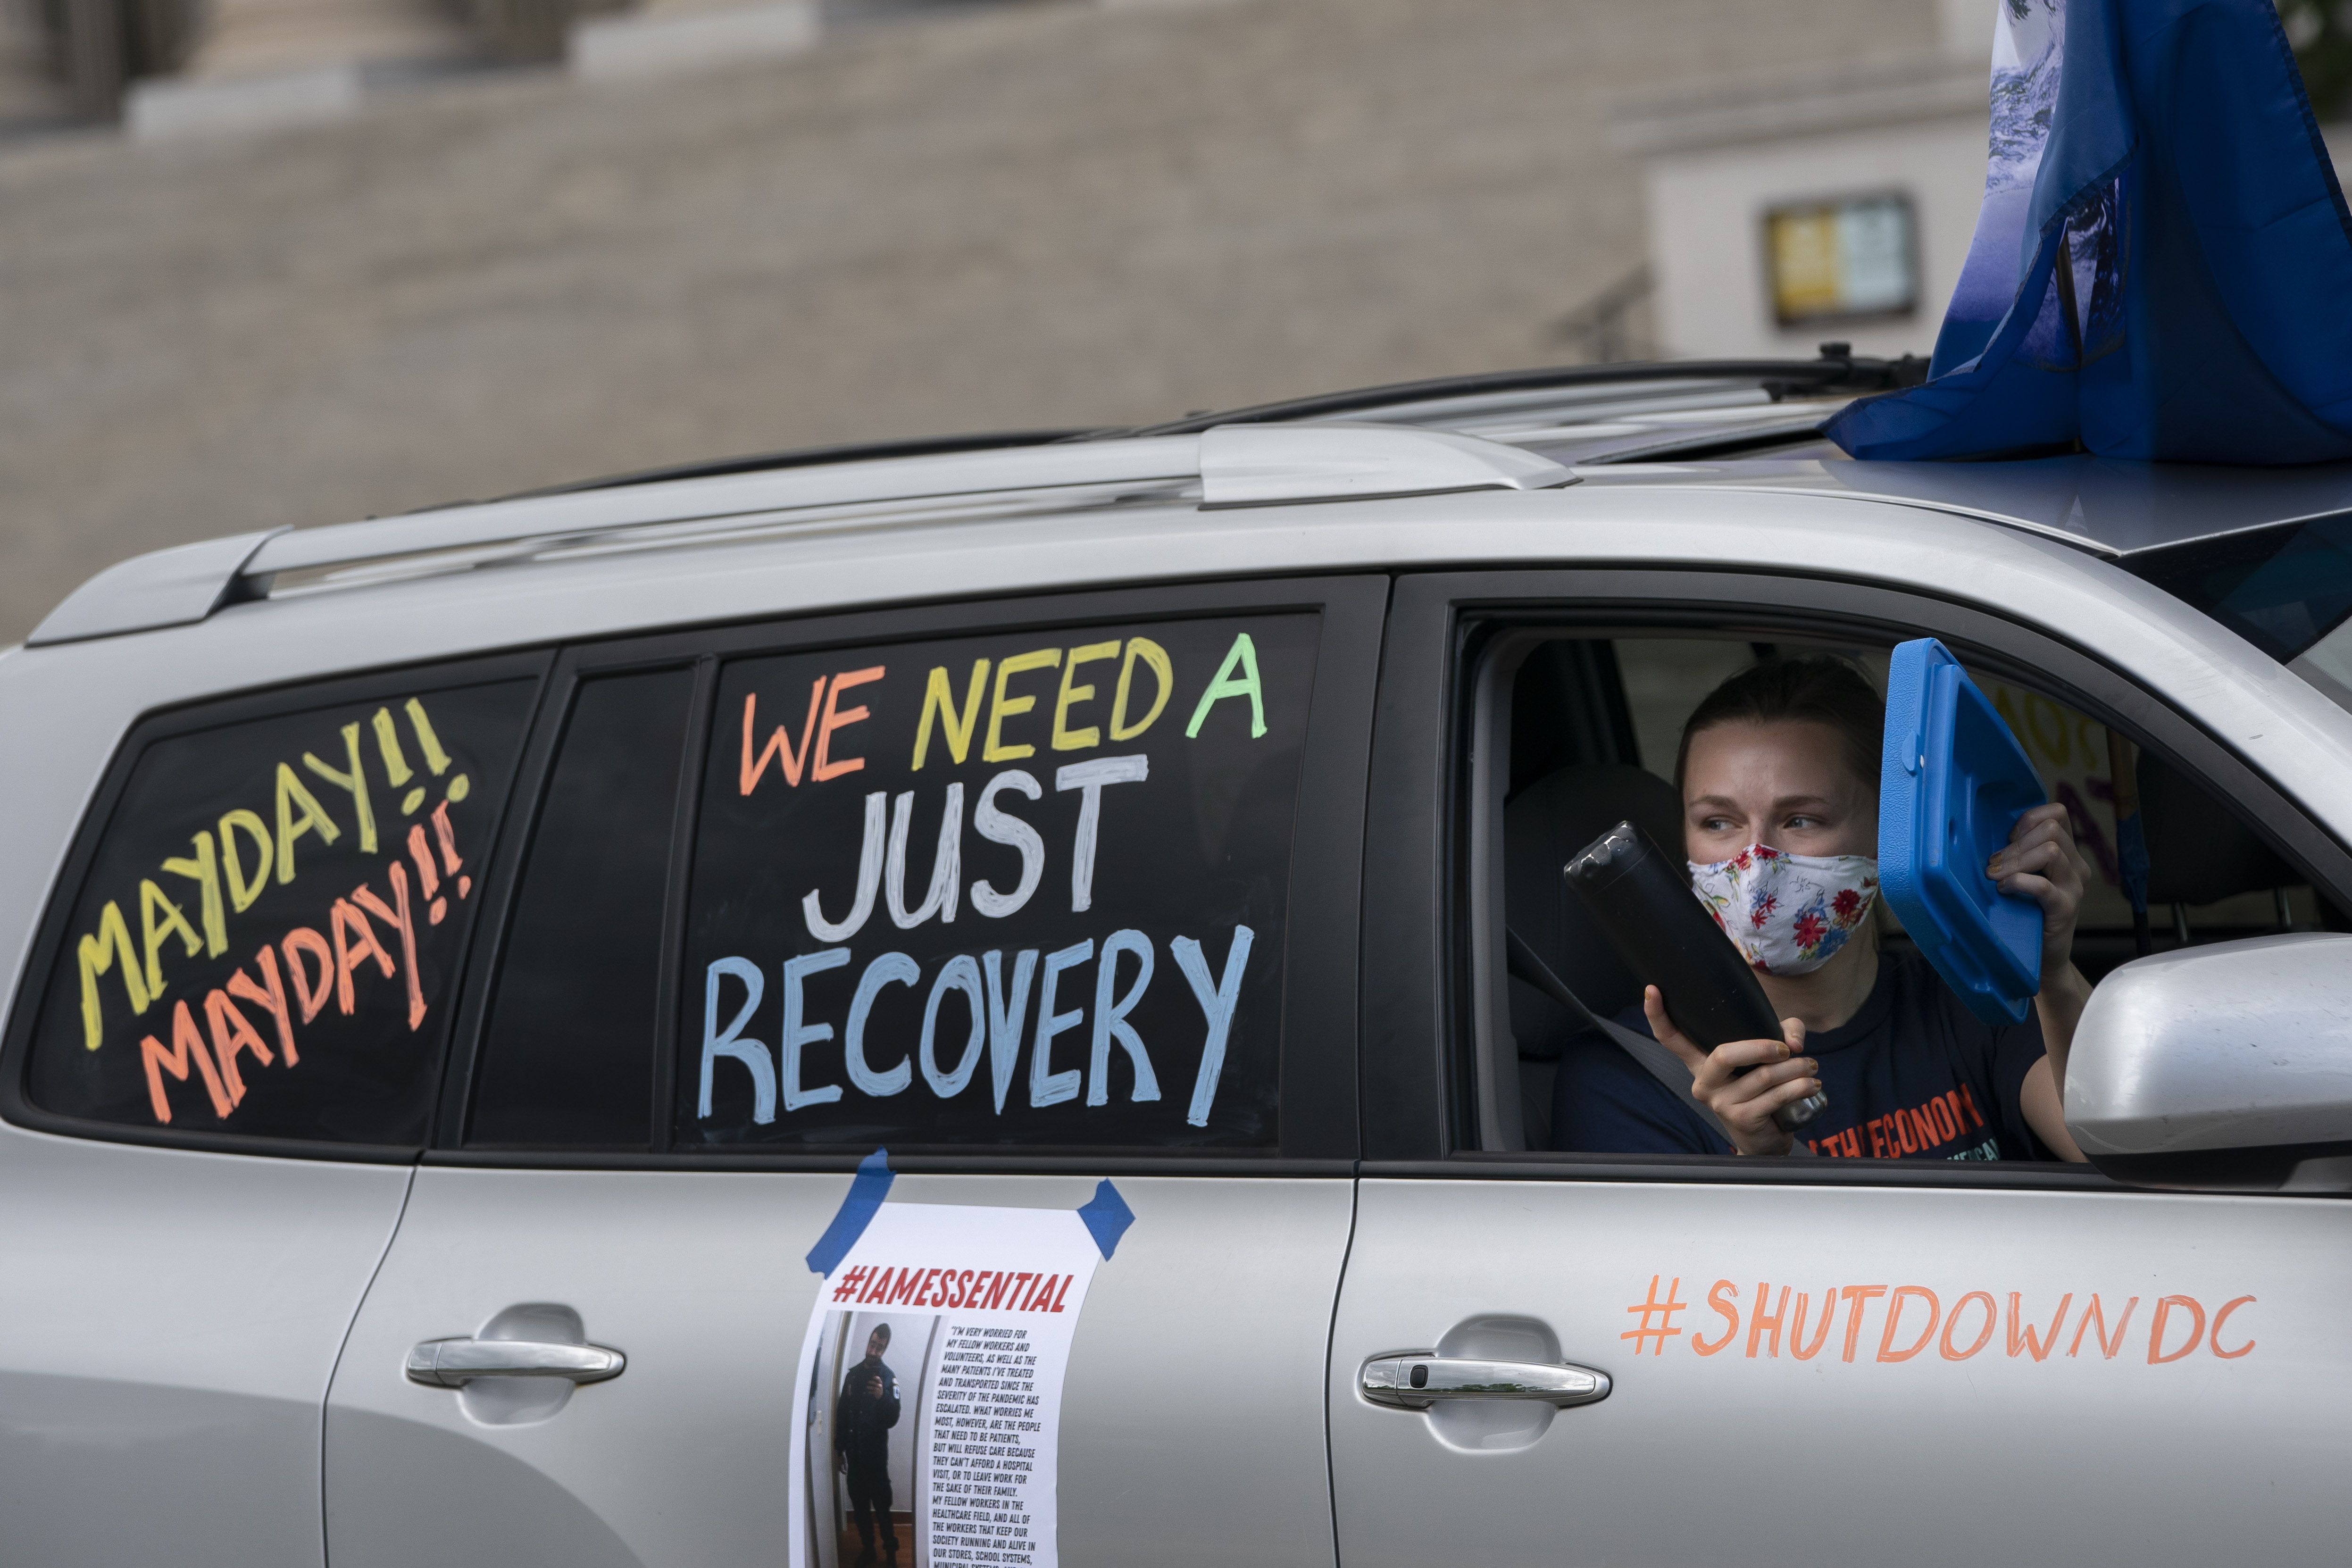 In this image, writing on a car reads: "Mayday! Mayday! we need a just recovery"